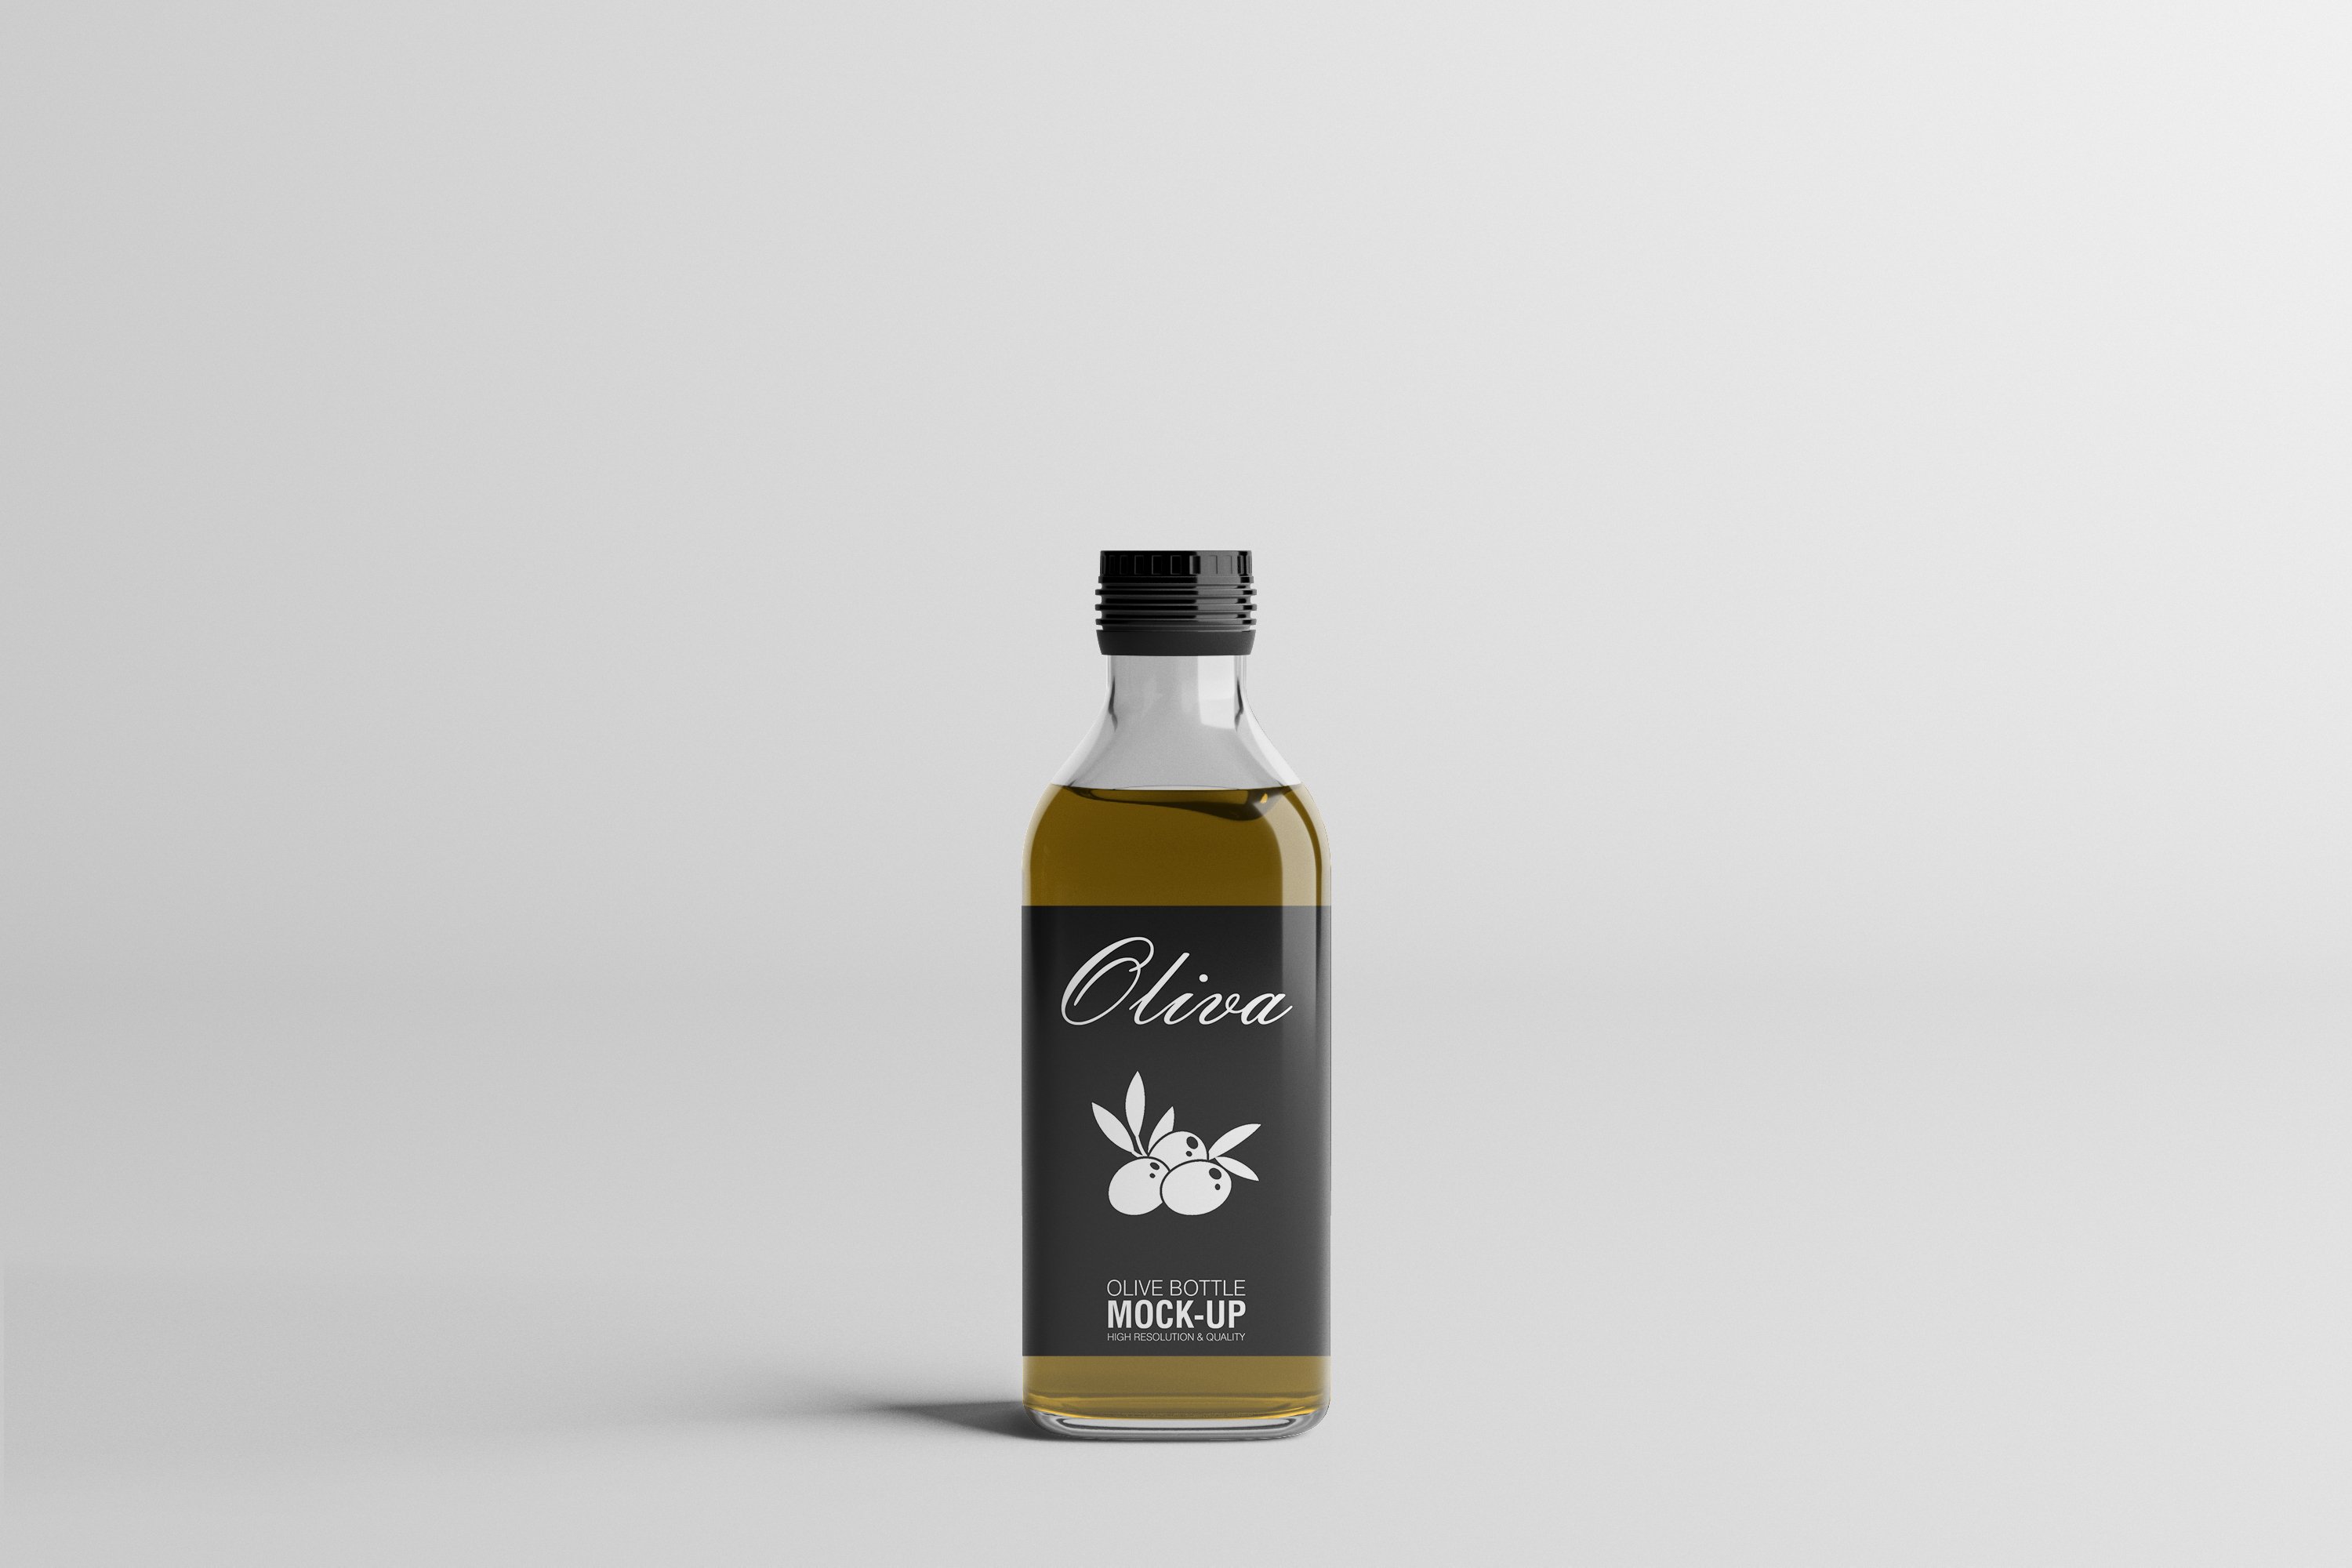 Classic bottle with black label with silver olive logo.